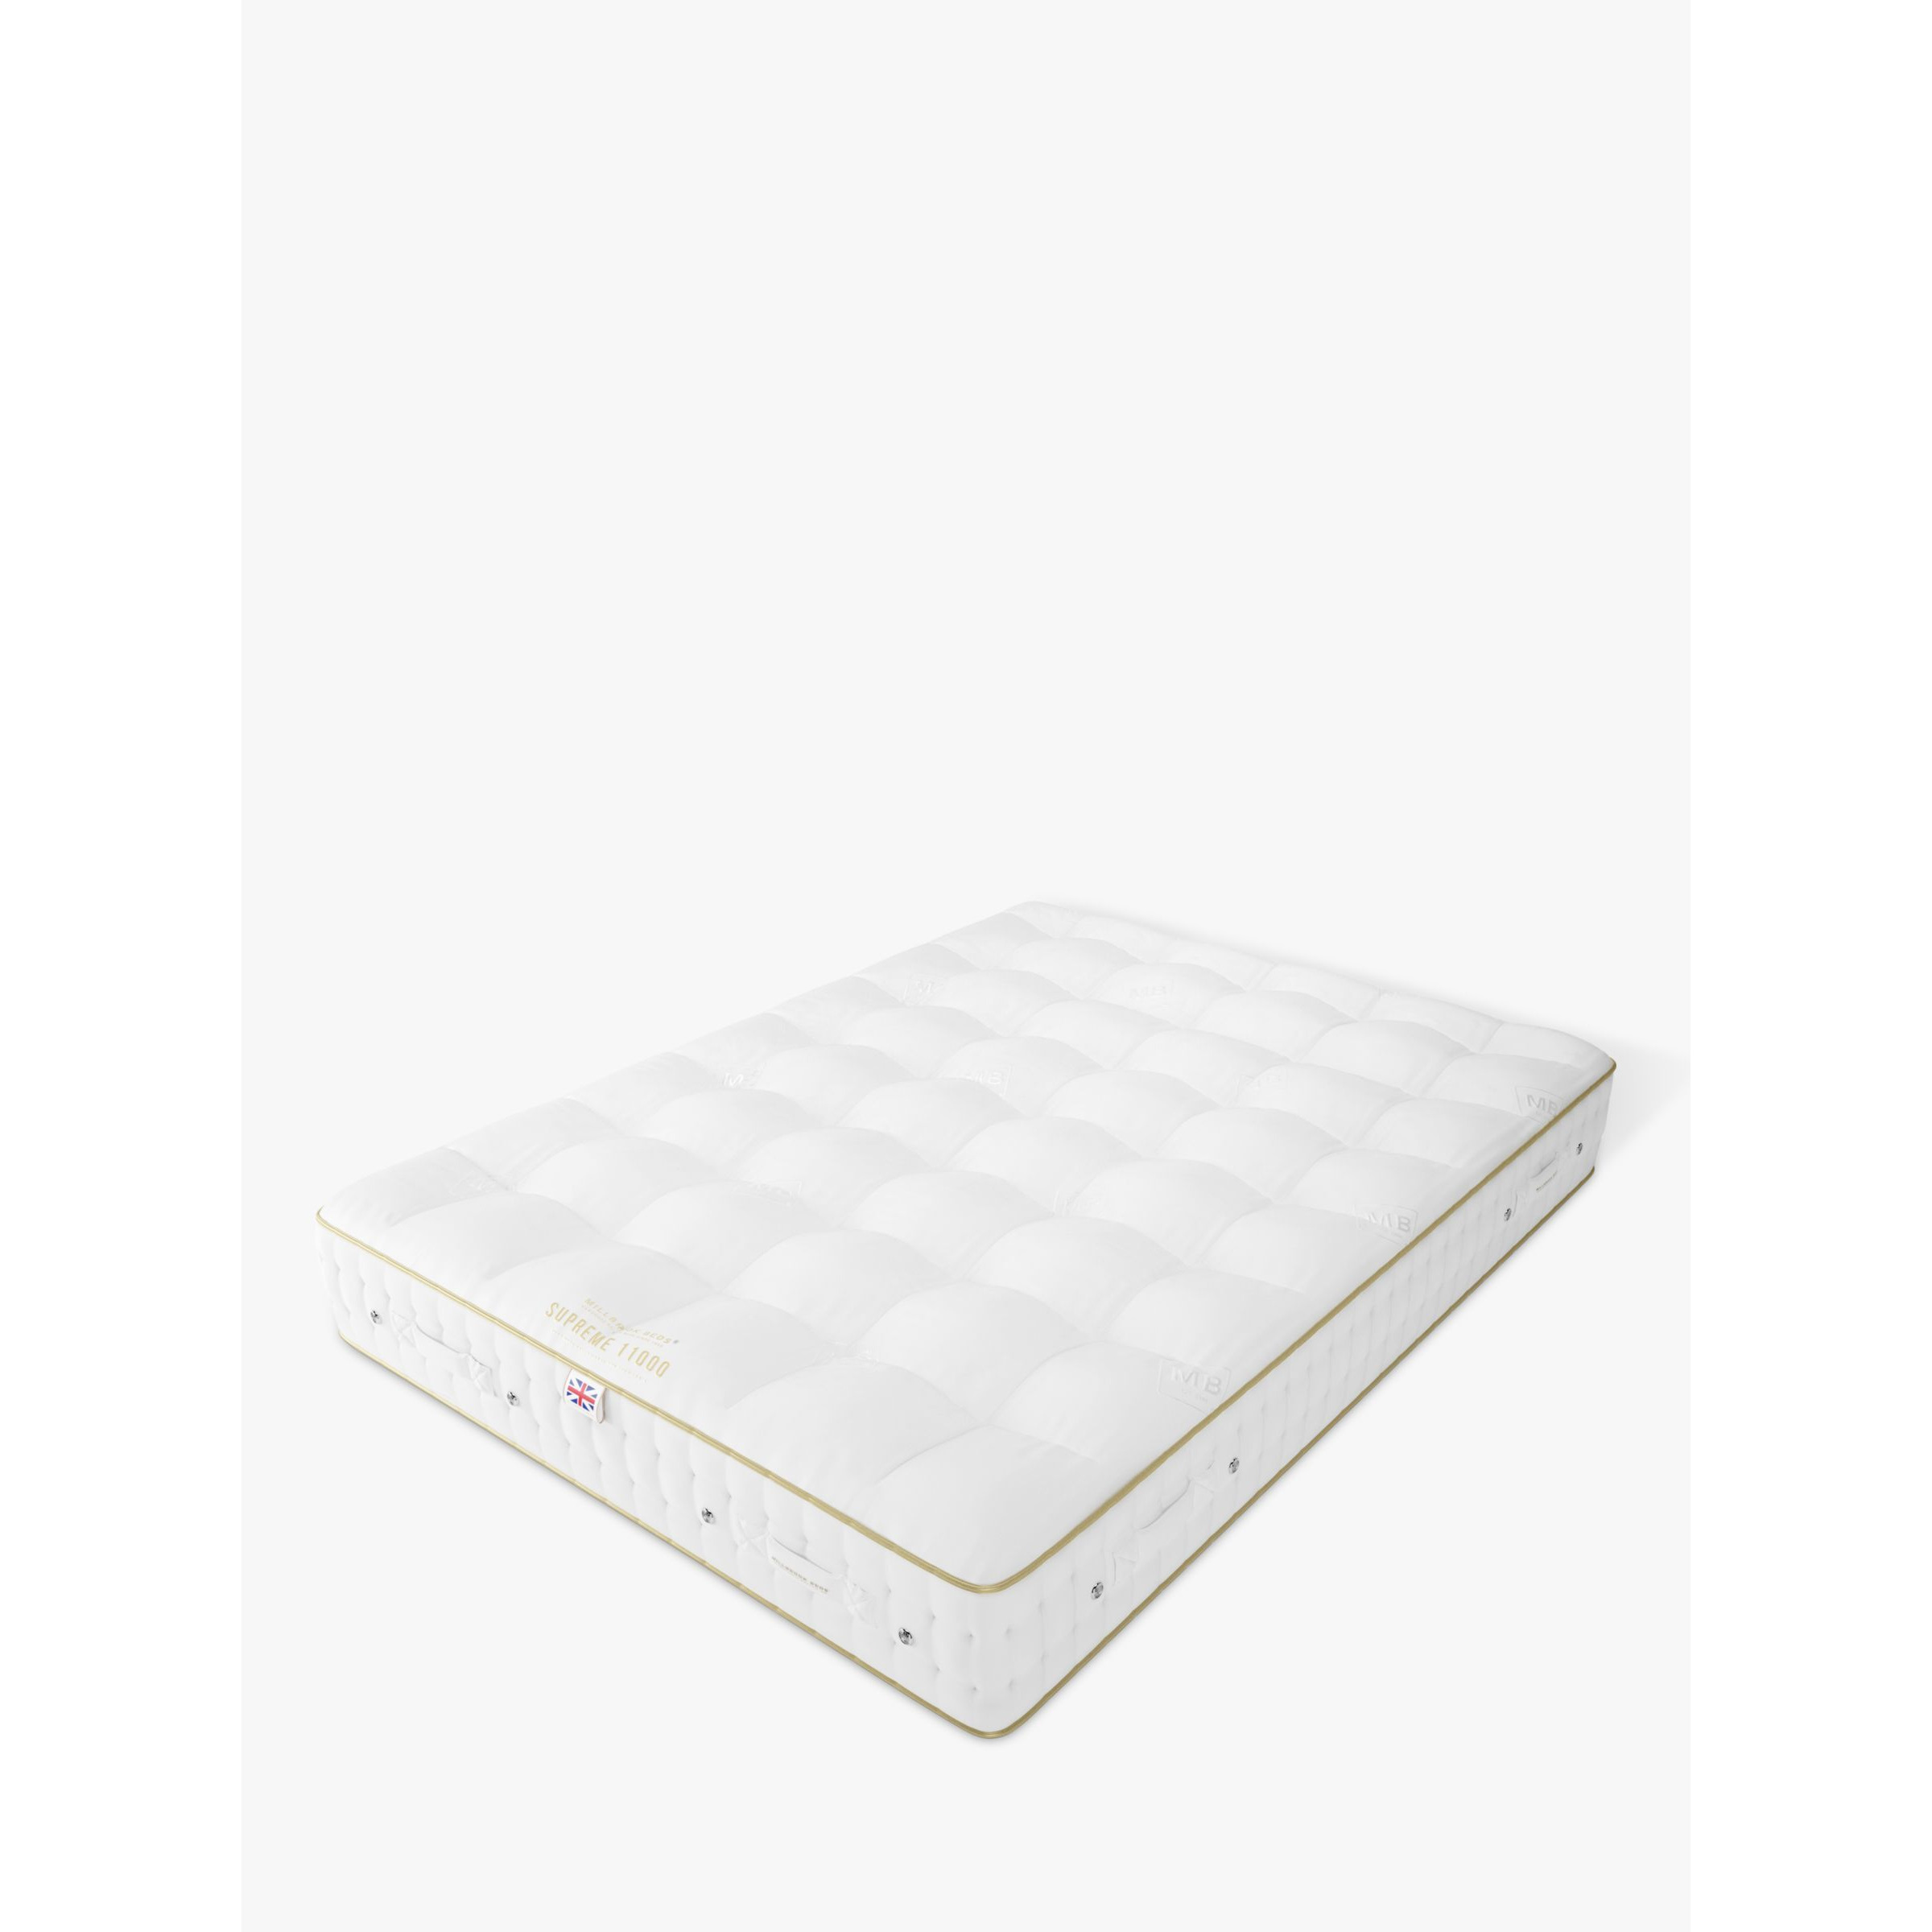 Millbrook Beds Supreme Collection 11000 Mattress, Firm Tension, King Size - image 1